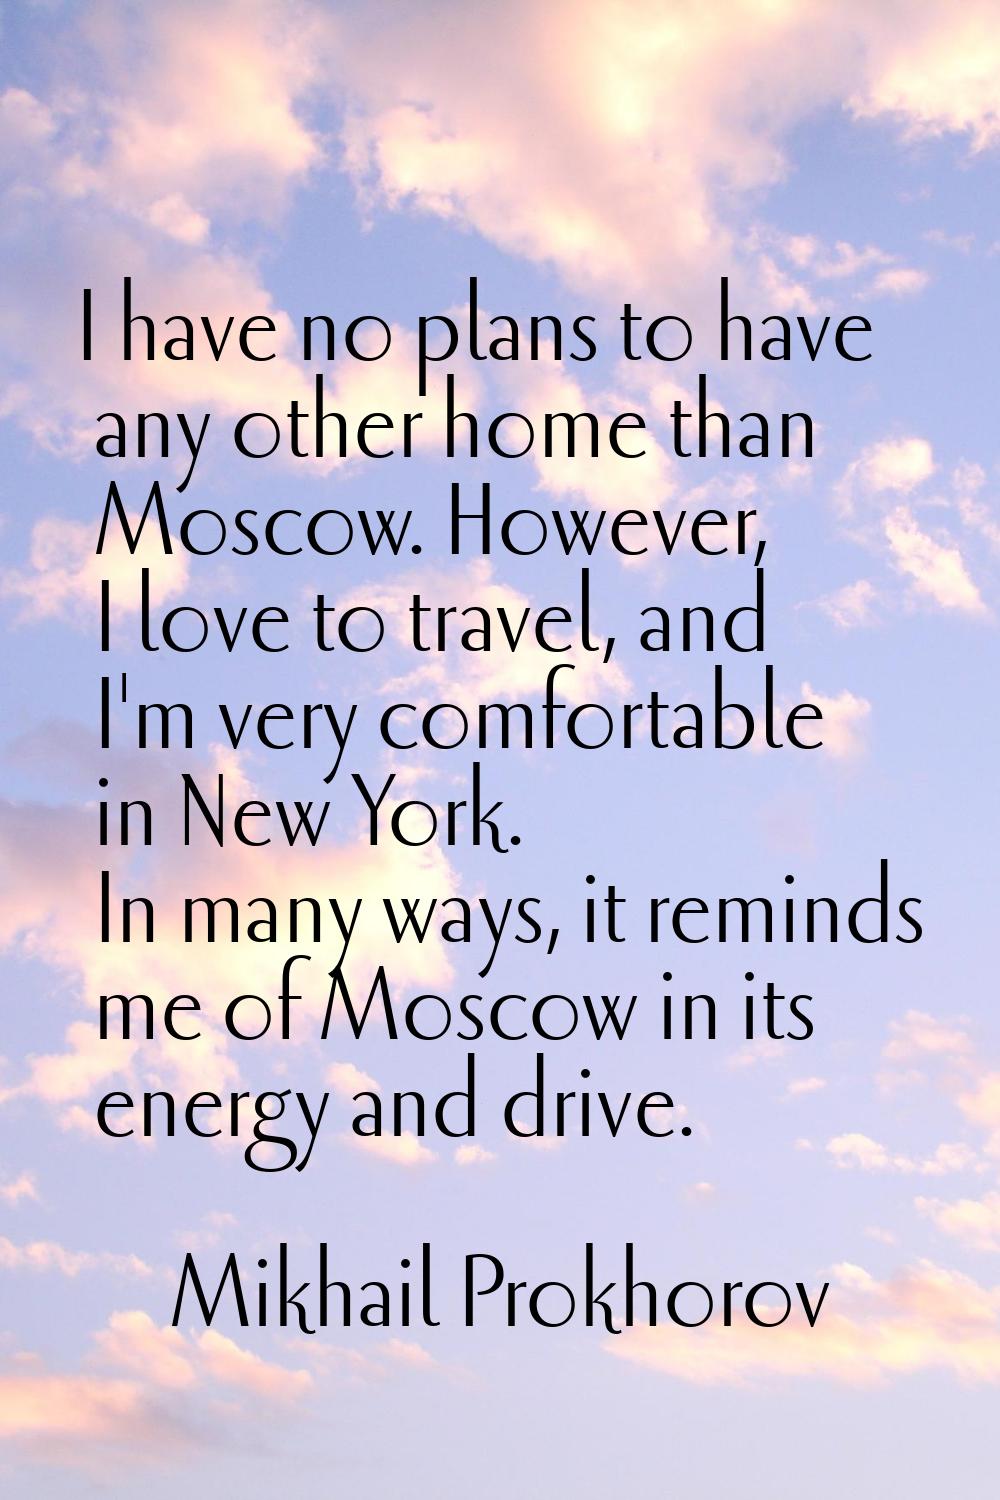 I have no plans to have any other home than Moscow. However, I love to travel, and I'm very comfort